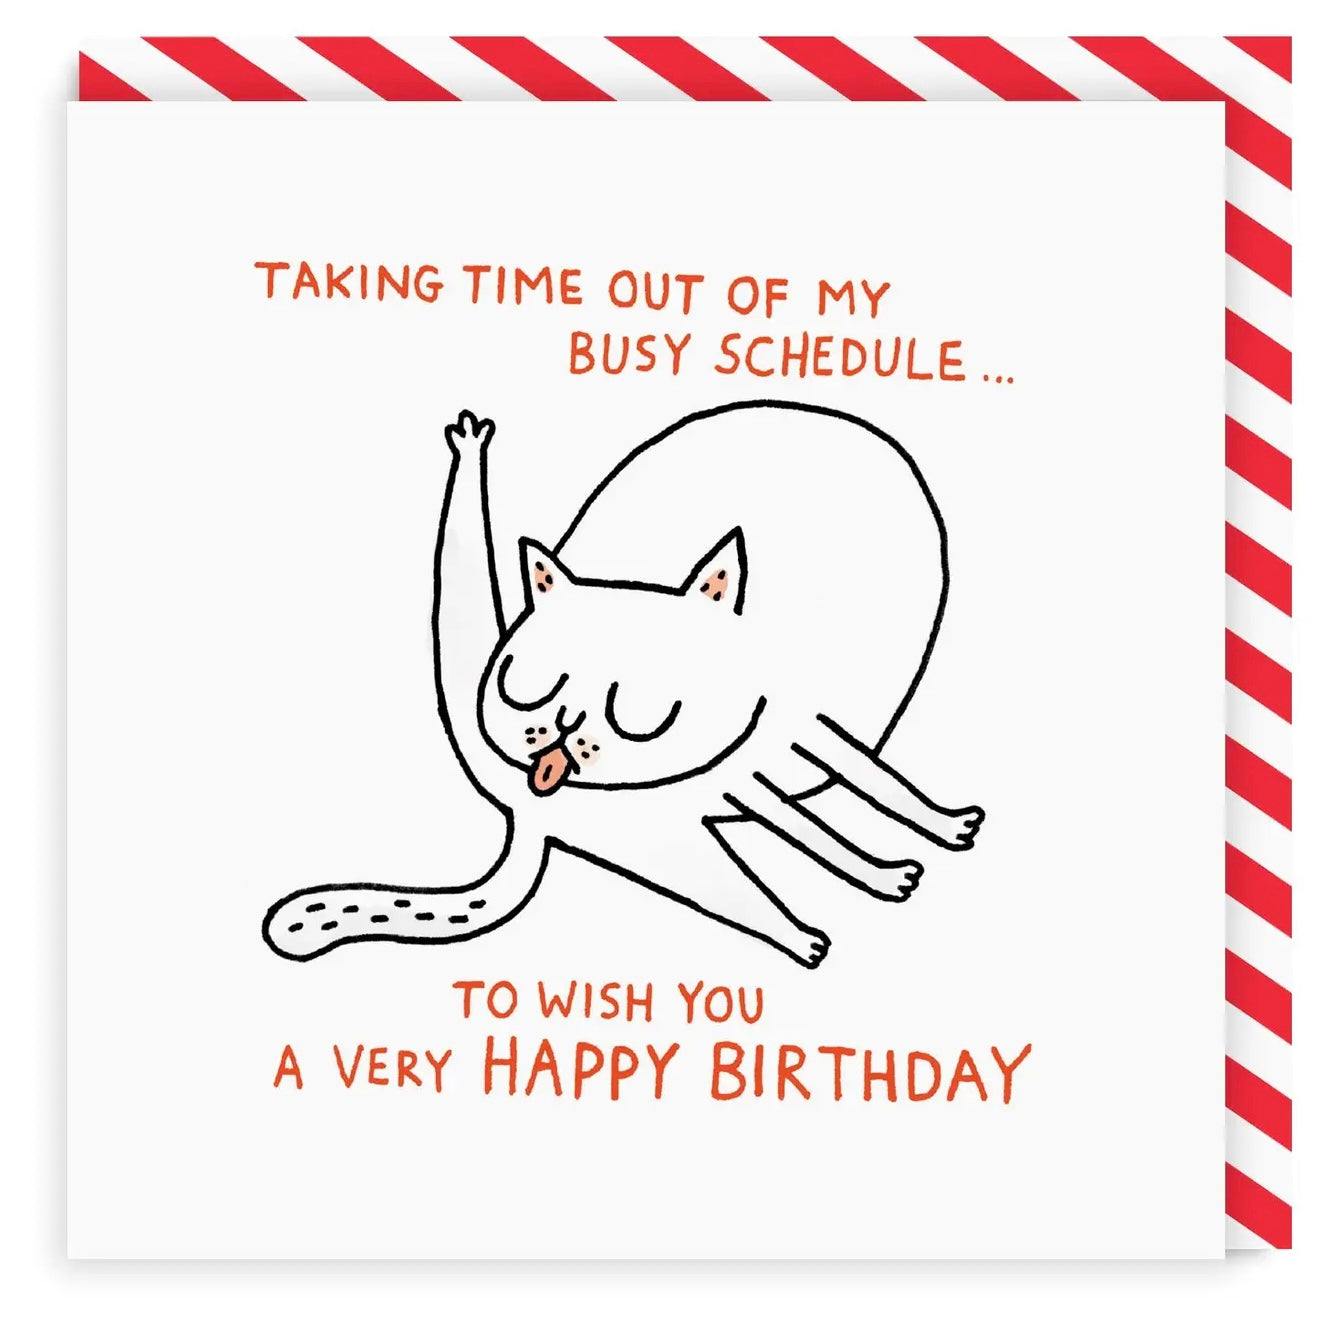 Busy Schedule Gemma Correll Greeting Card